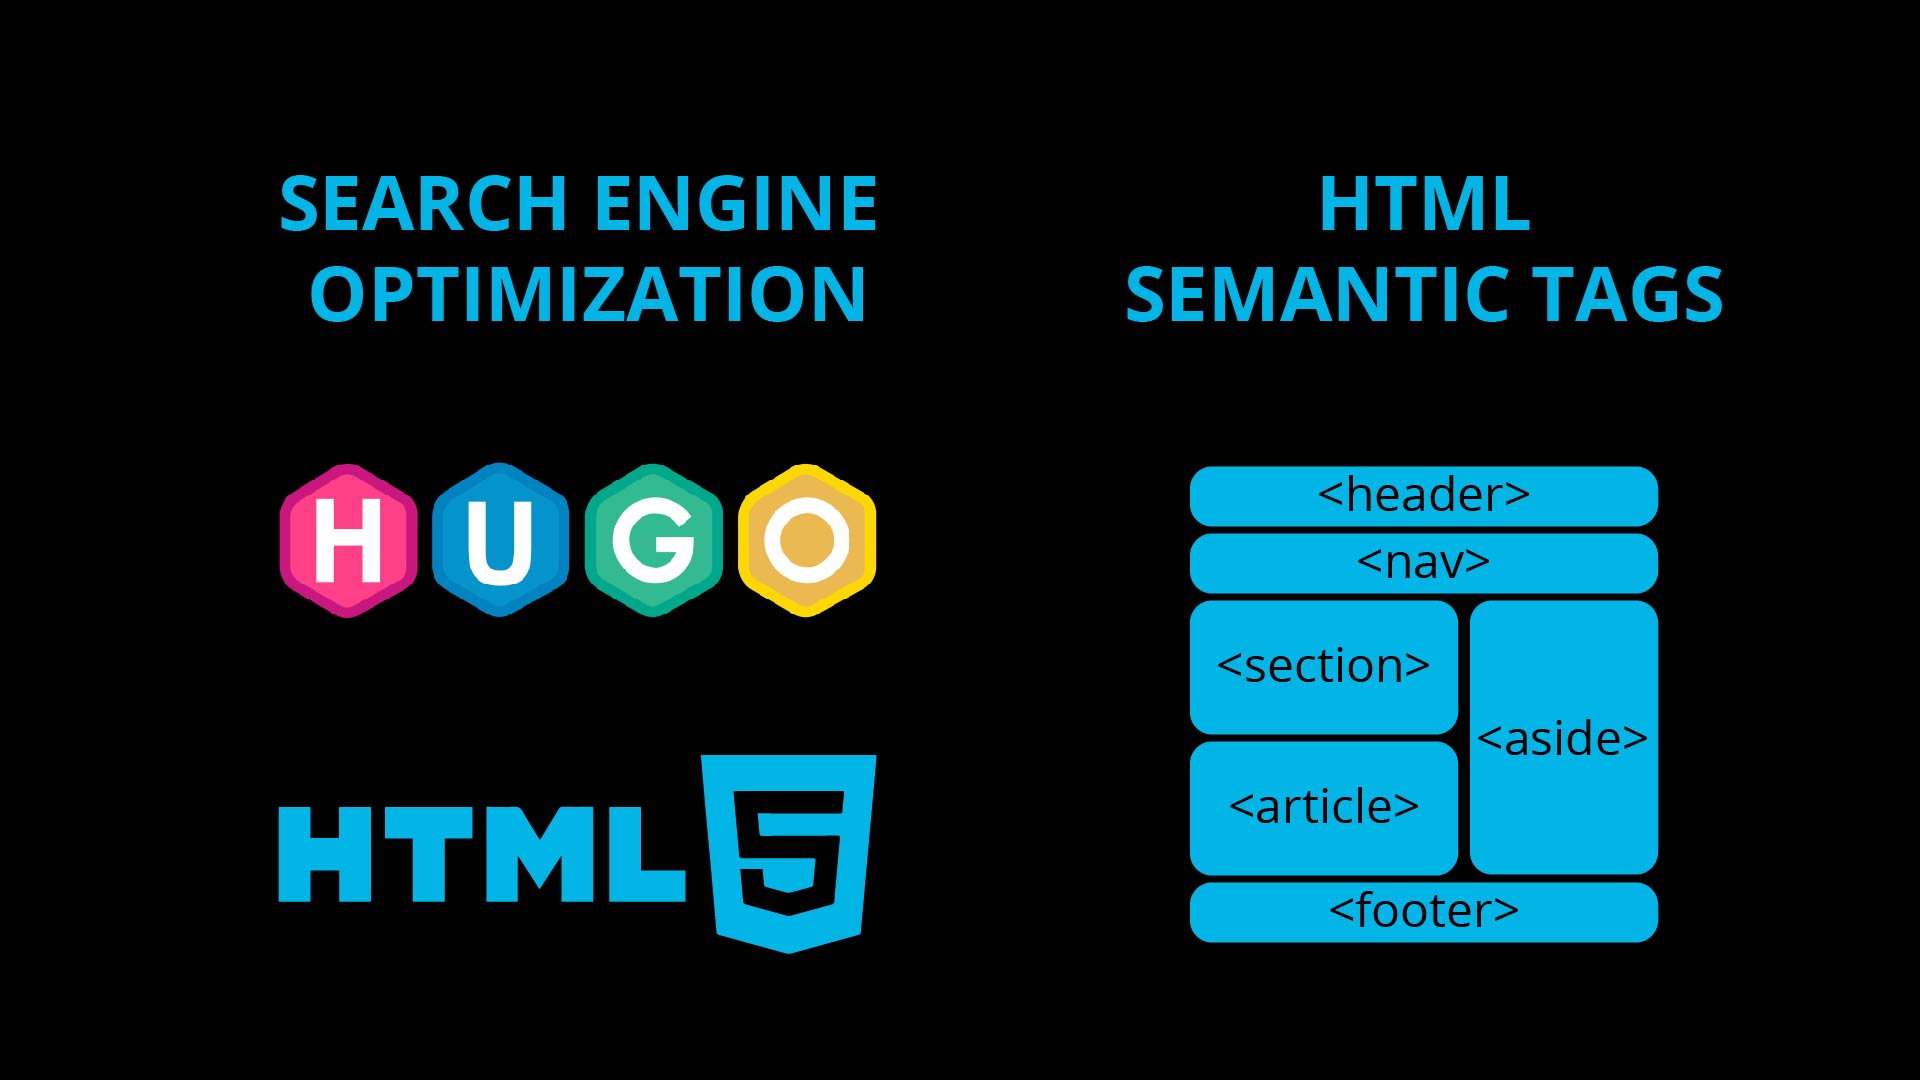 Image for SEO With Hugo (1) - HTML Semantic Tags hero section